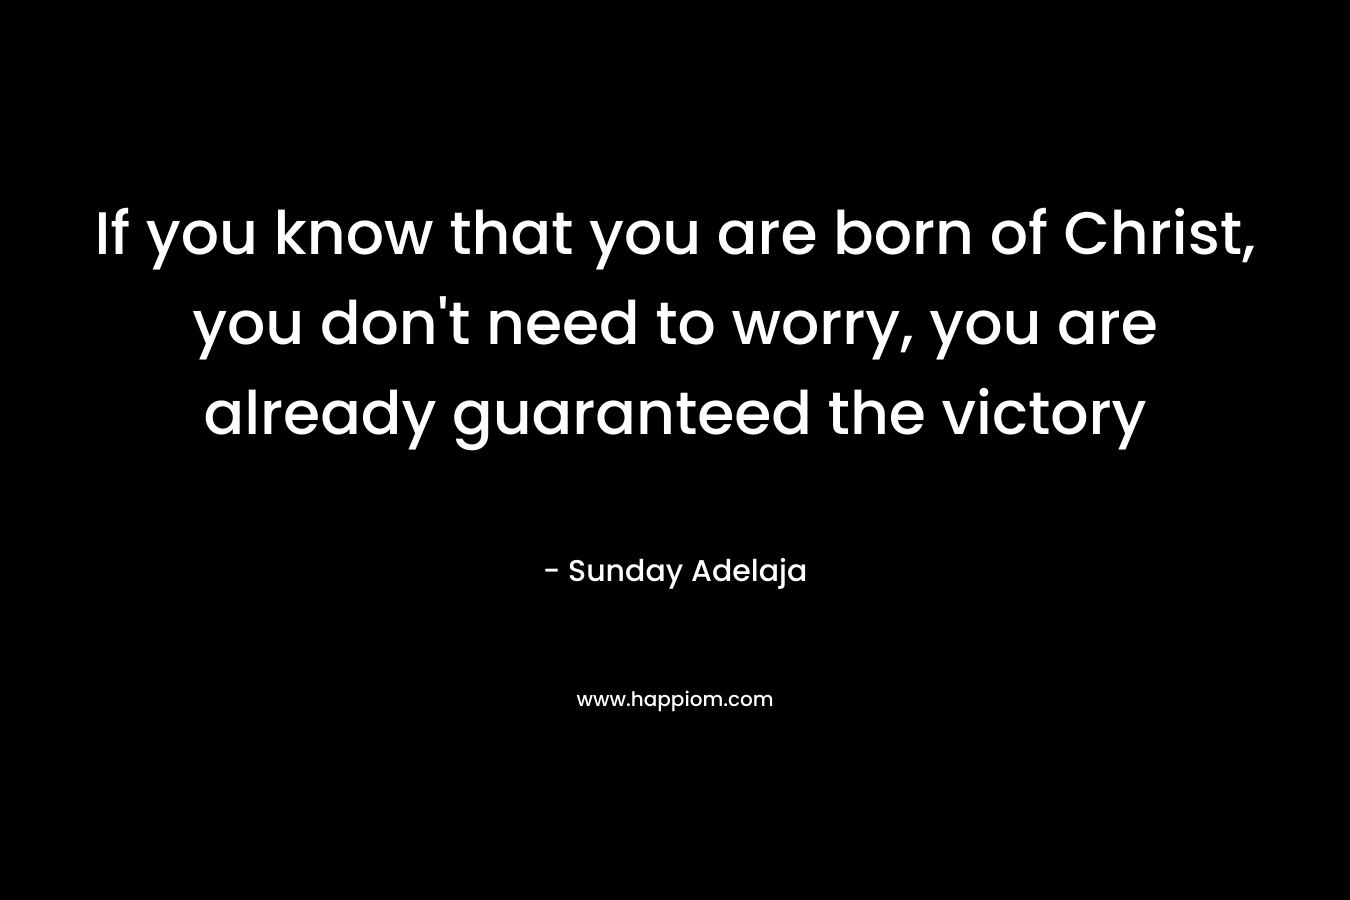 If you know that you are born of Christ, you don't need to worry, you are already guaranteed the victory